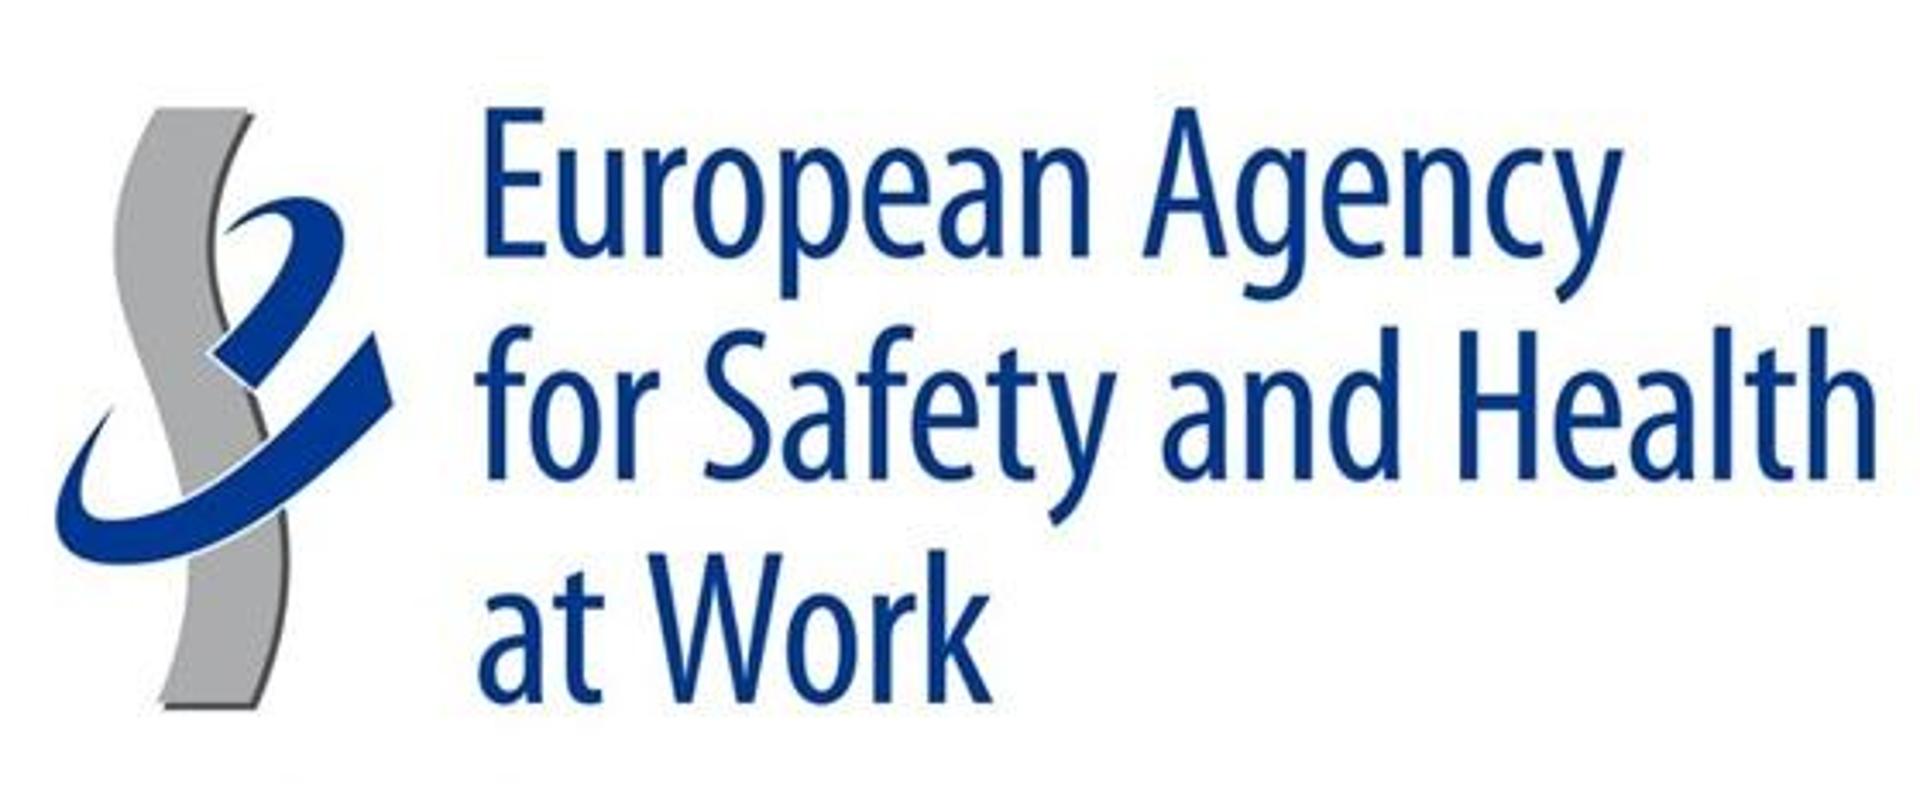 European_Agency_for_Safety_and_Health_at_Work